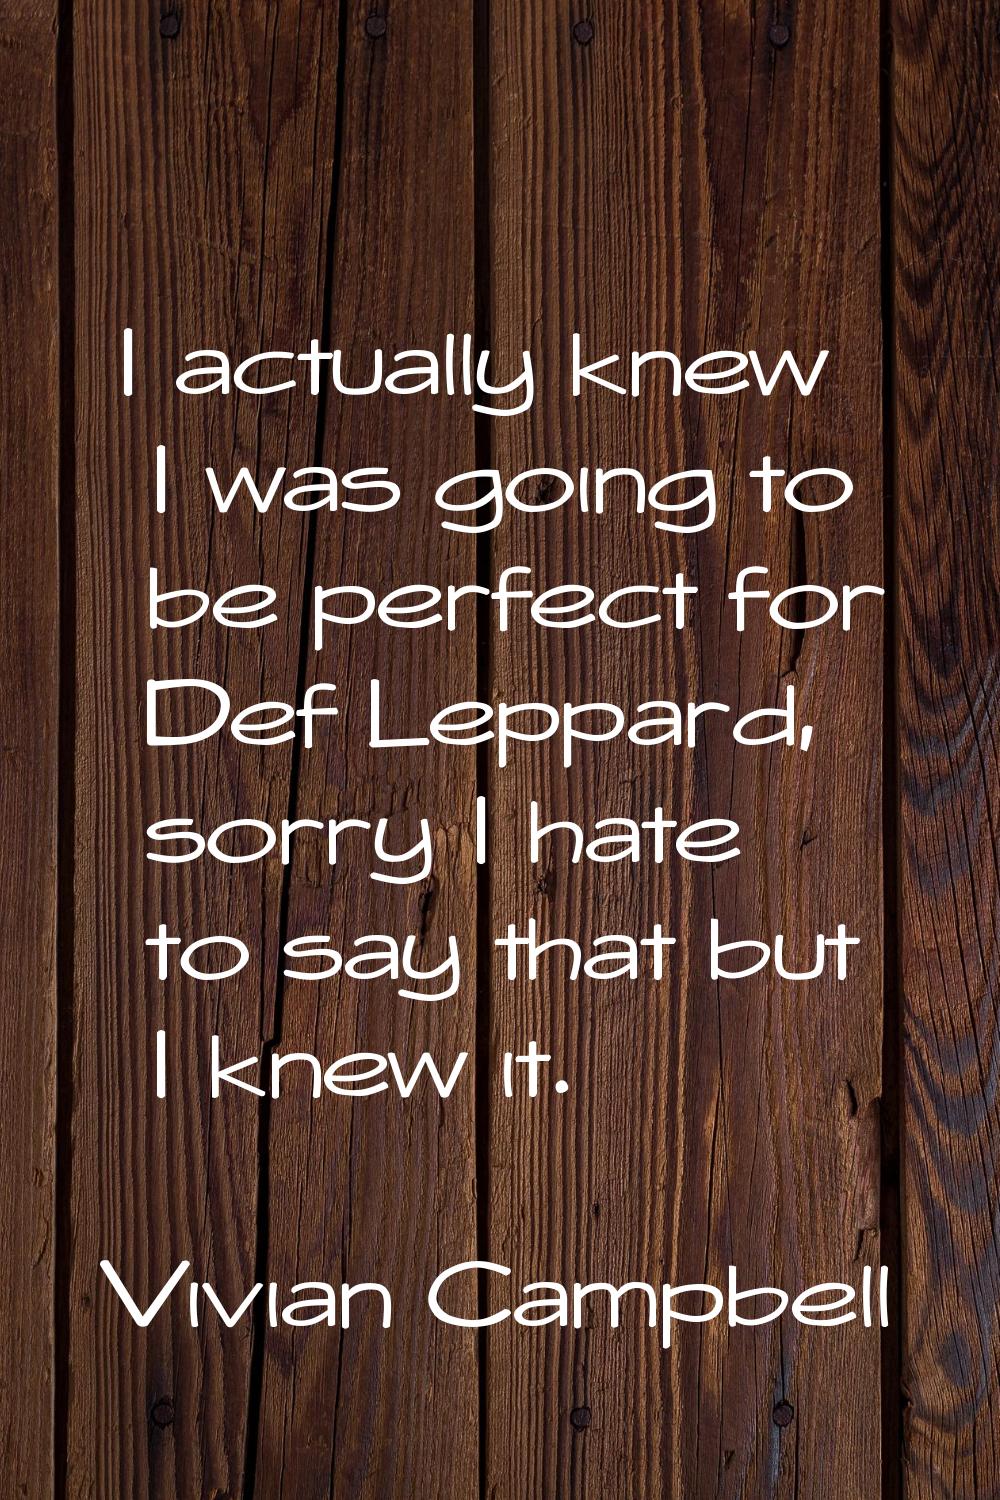 I actually knew I was going to be perfect for Def Leppard, sorry I hate to say that but I knew it.